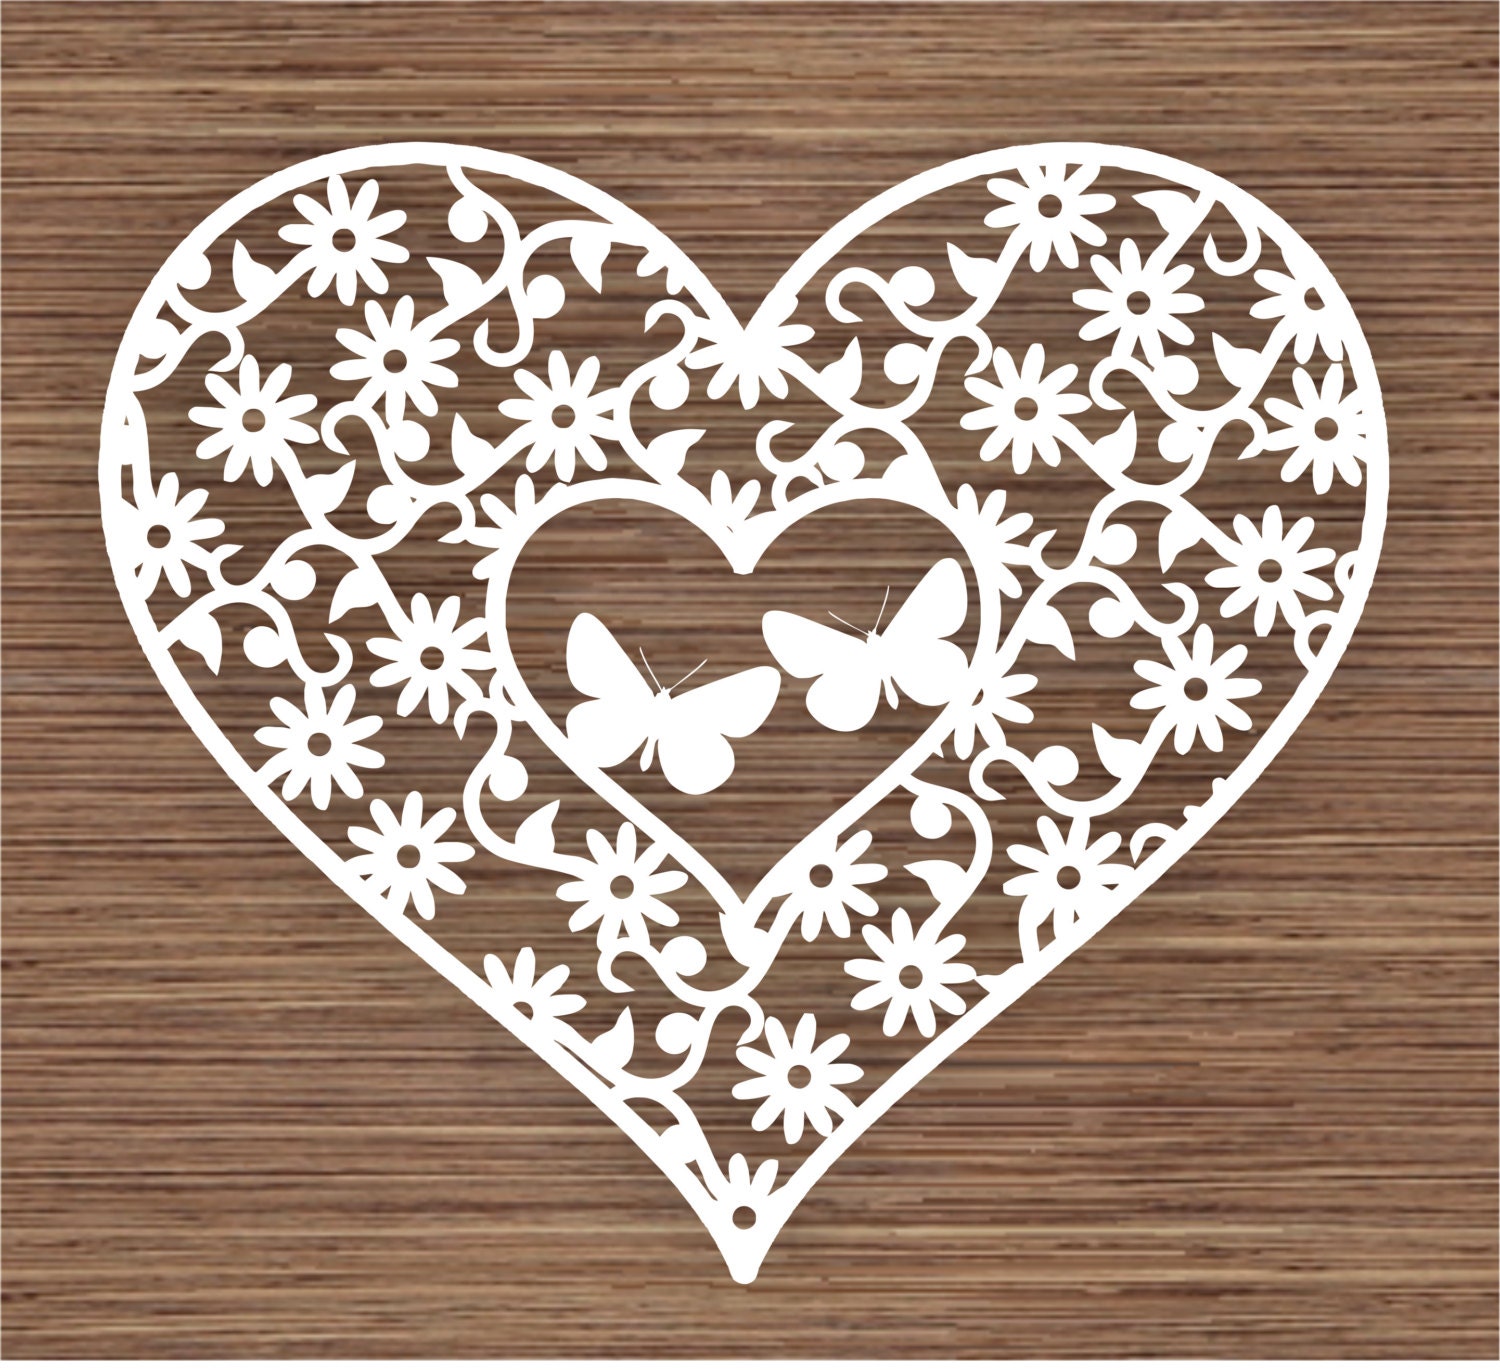 Download Butterflies in flowers and Heart PDF SVG Commercial Use